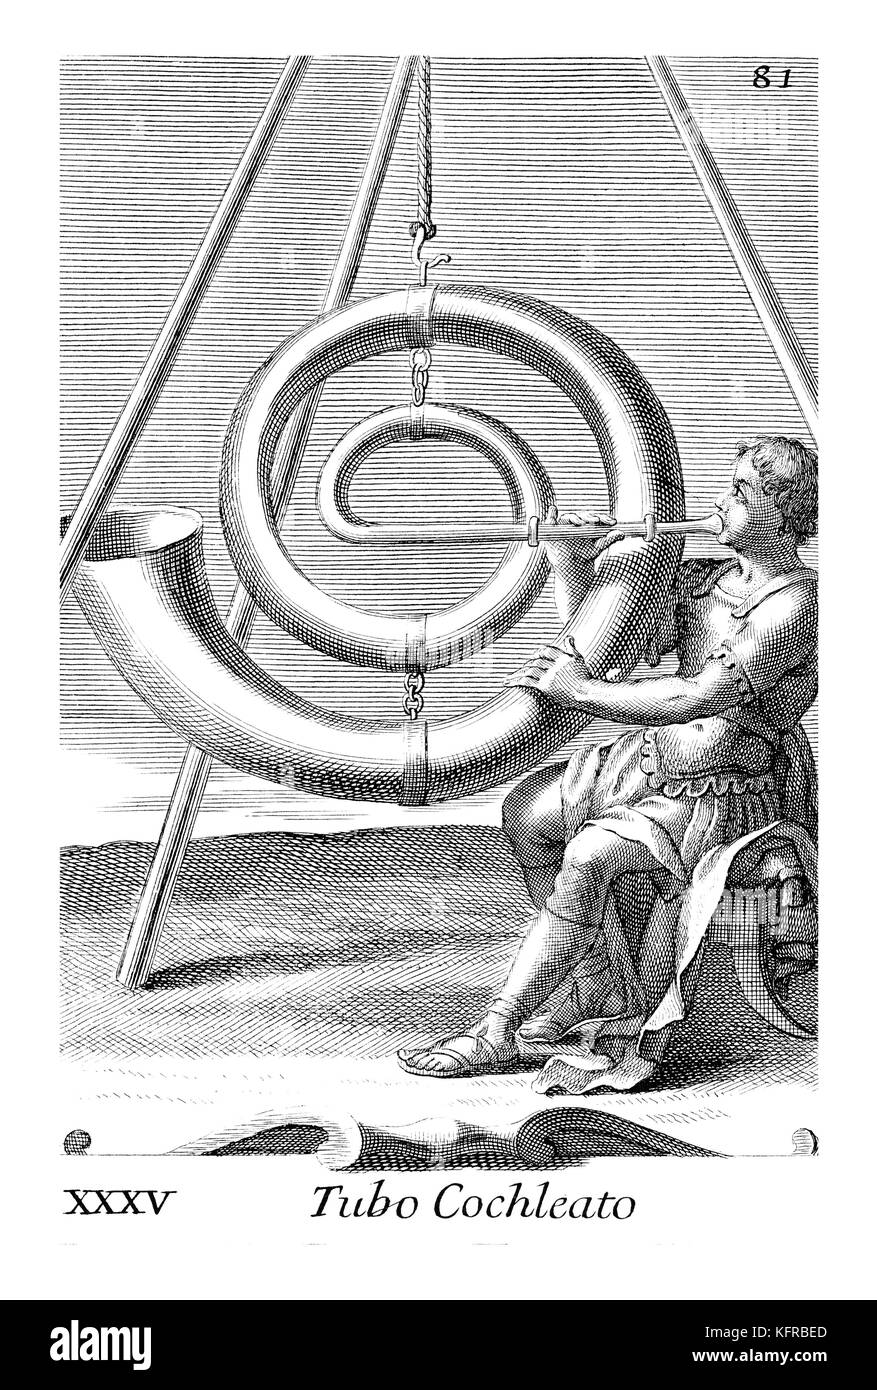 'Voice amplifier' - large elliptical tube for magnifying the sound of voice. Illustration from Filippo Bonanni's  'Gabinetto Armonico'  published in 1723, Illustration 35. Engraving by Arnold van Westerhout.Caption reads Tubo Cochleato. This instrument may never have existed. Stock Photo